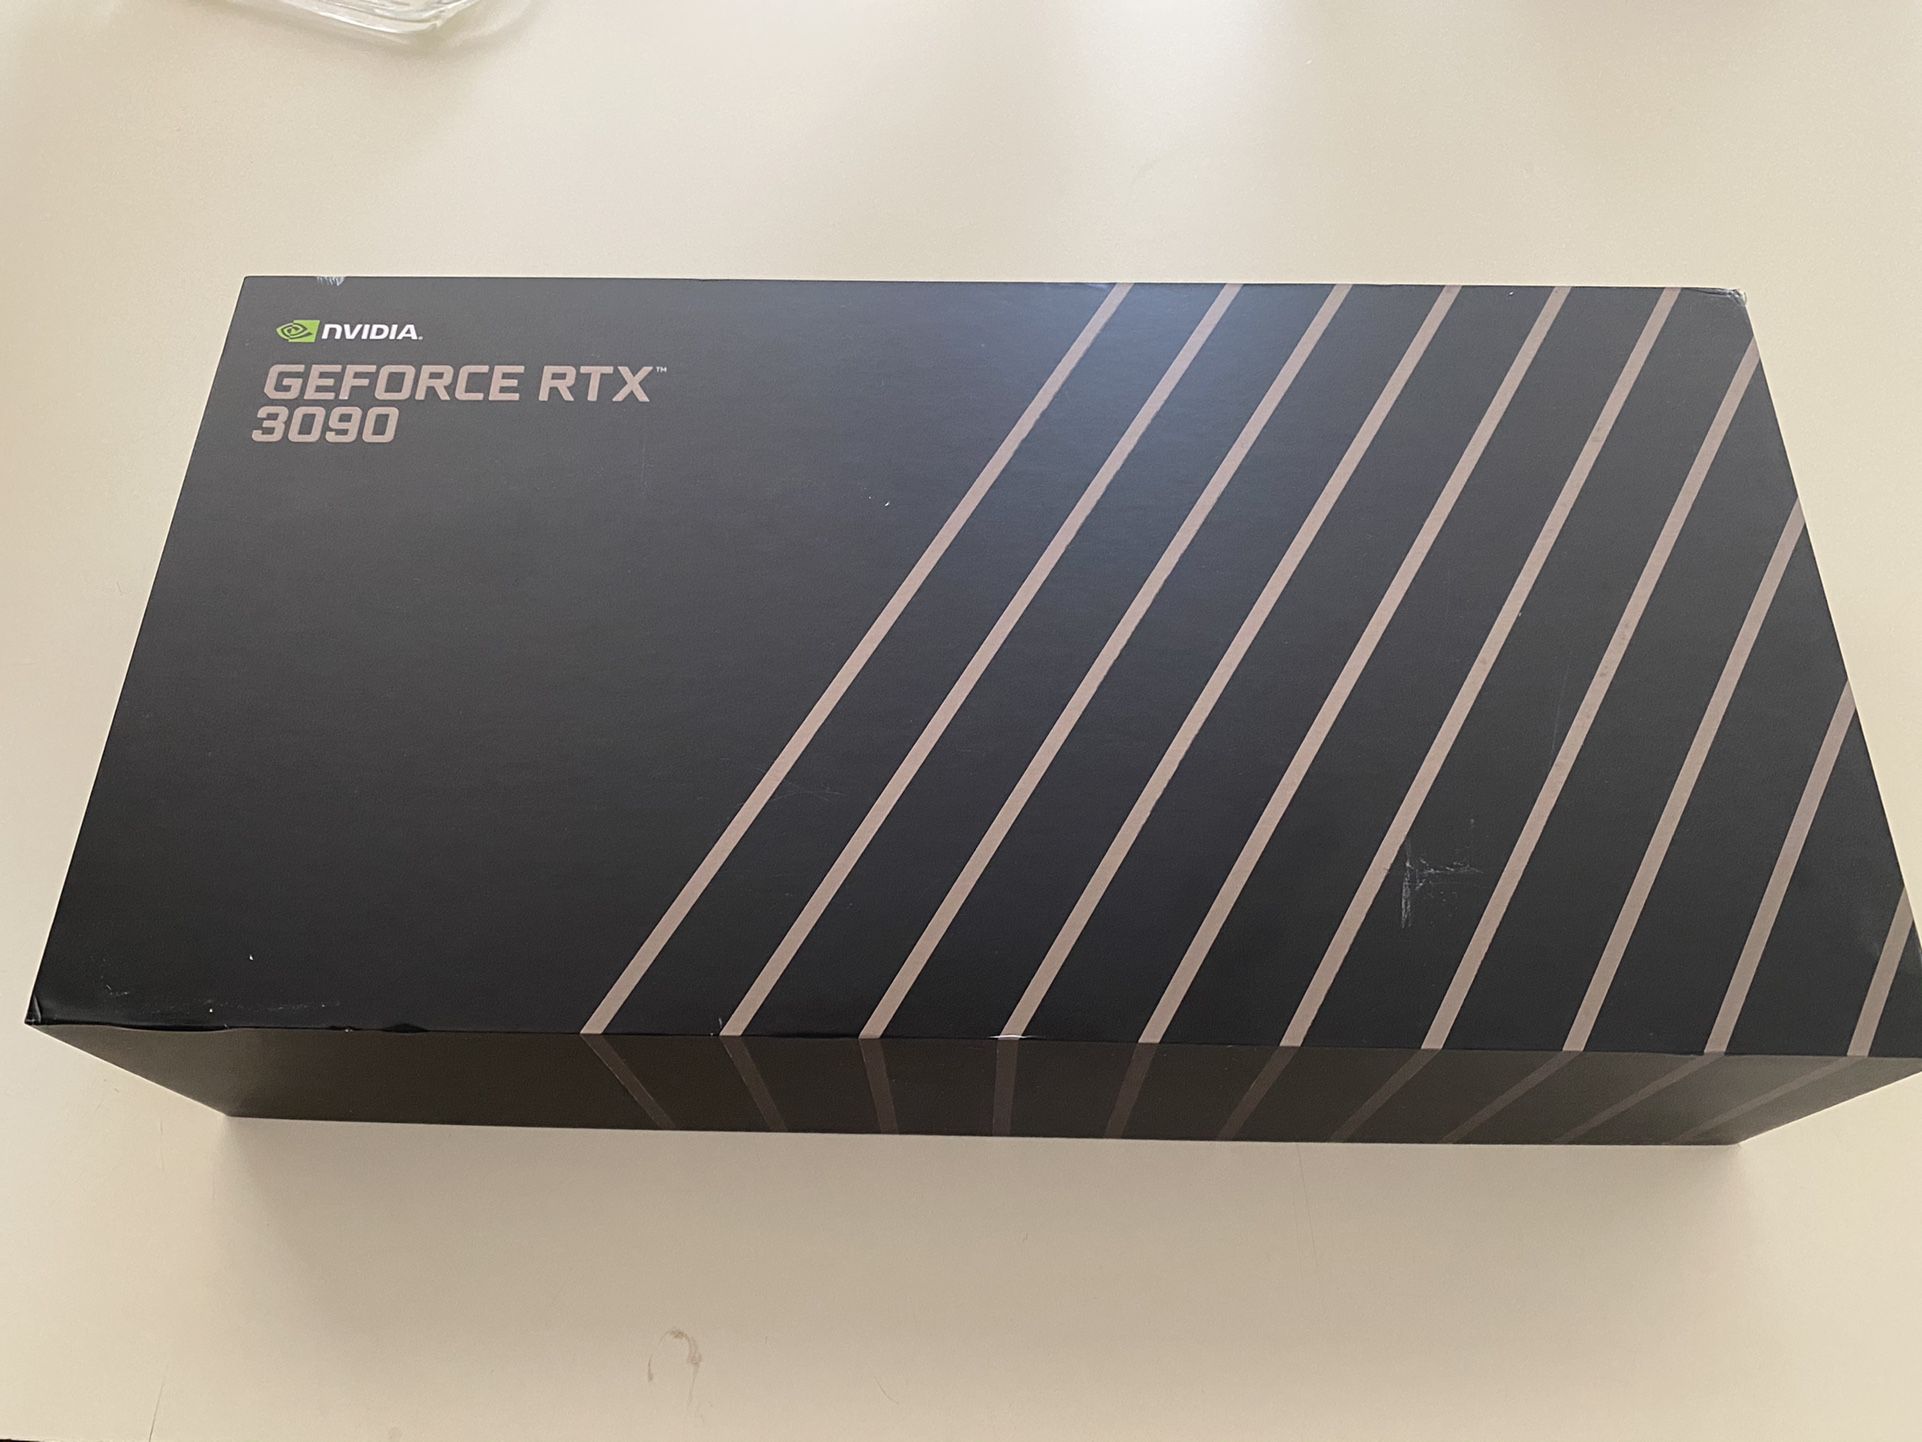 Nvidia 3090 Founders Edition. WTT For New PS5 + Cash.